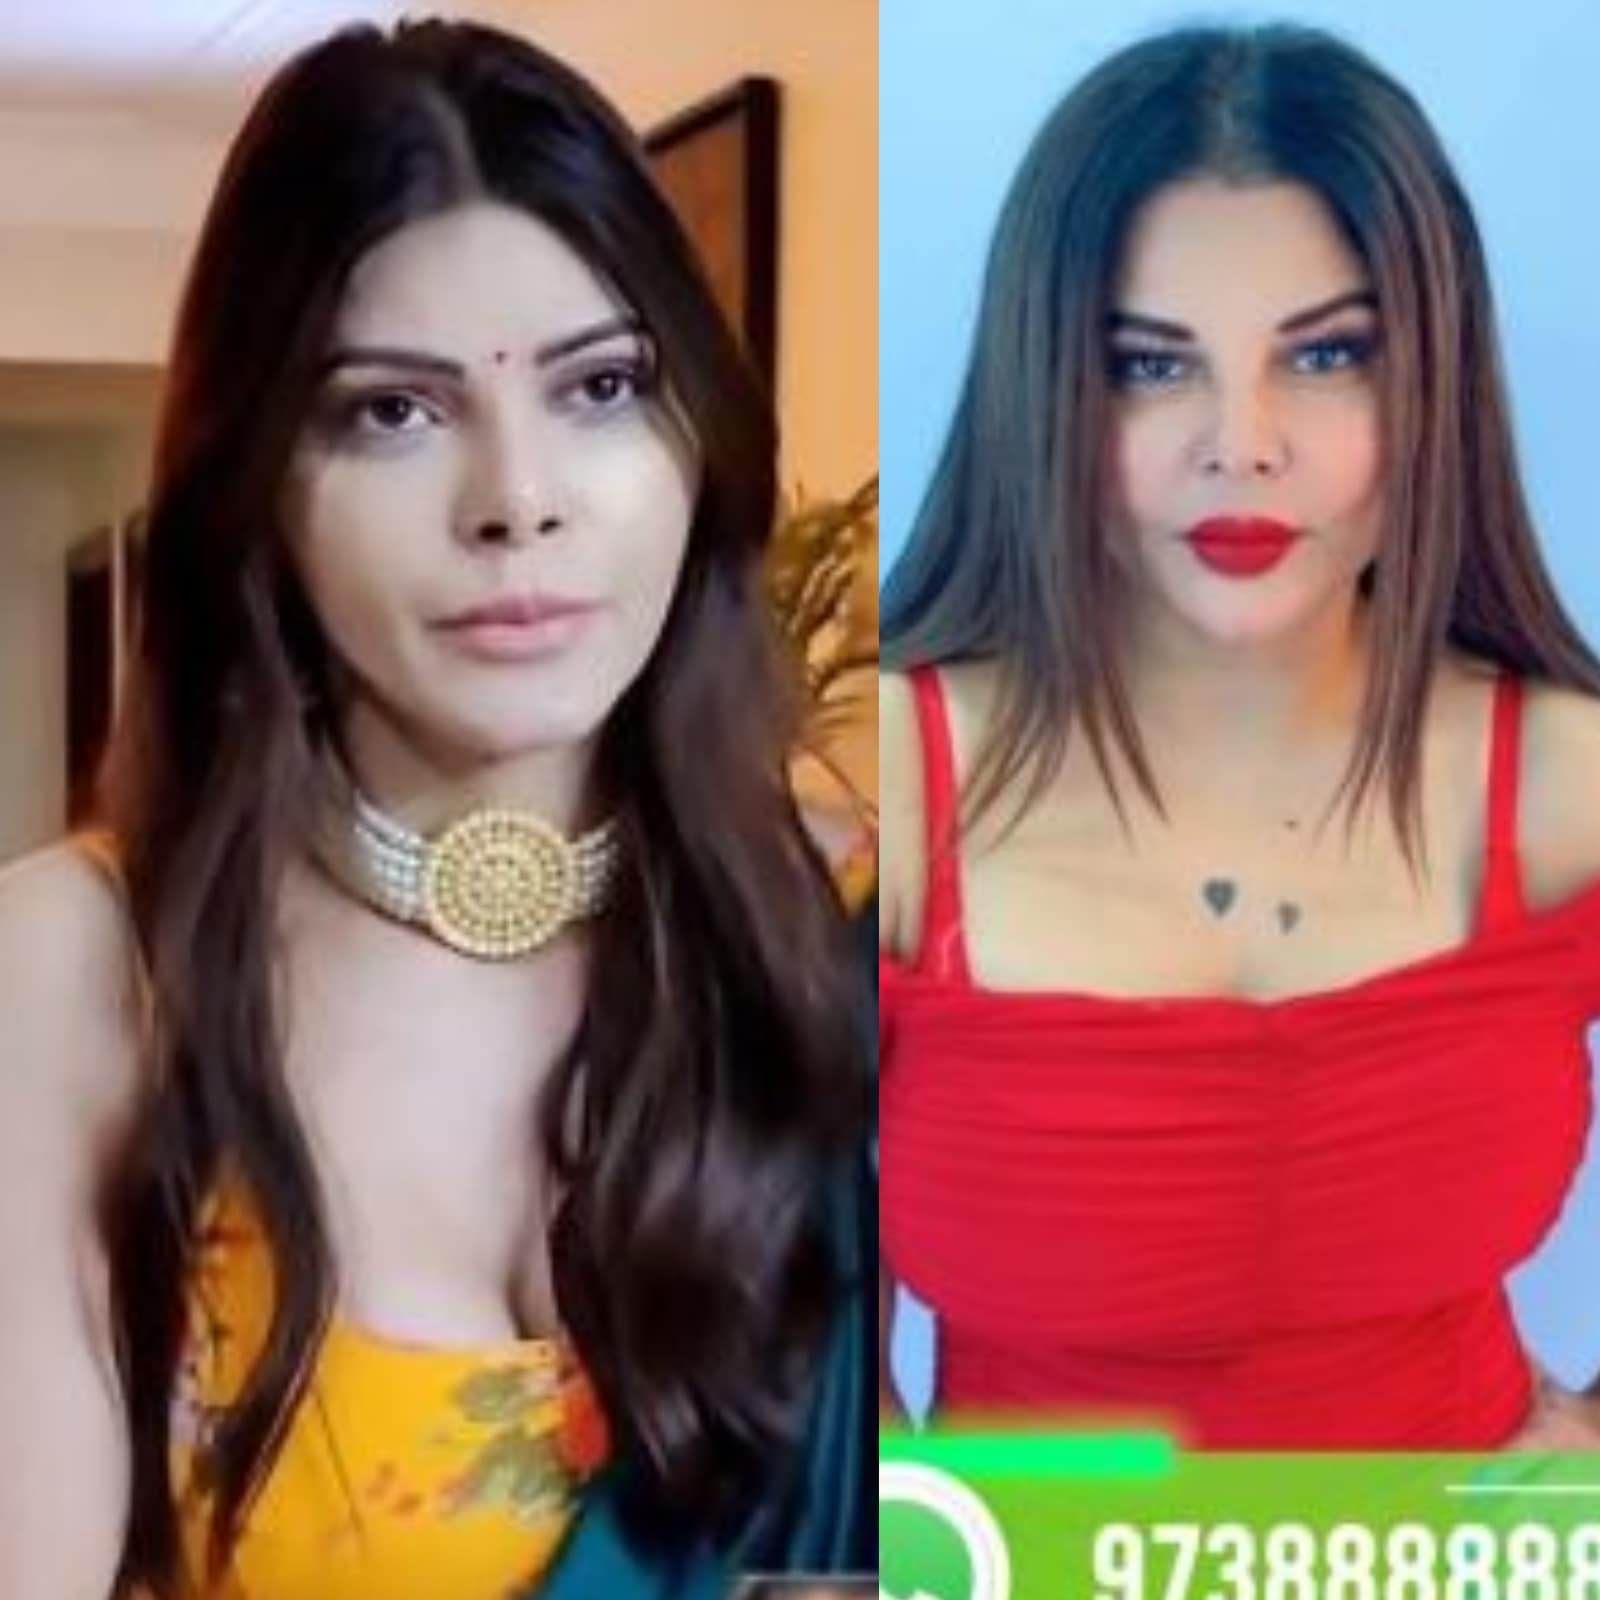 Bf Sexy Film Tamanna Xxx Model - Rakhi Sawant Files a Defamation Case Against Sherlyn Chopra, Accuses Her of  Blackmailing People - News18